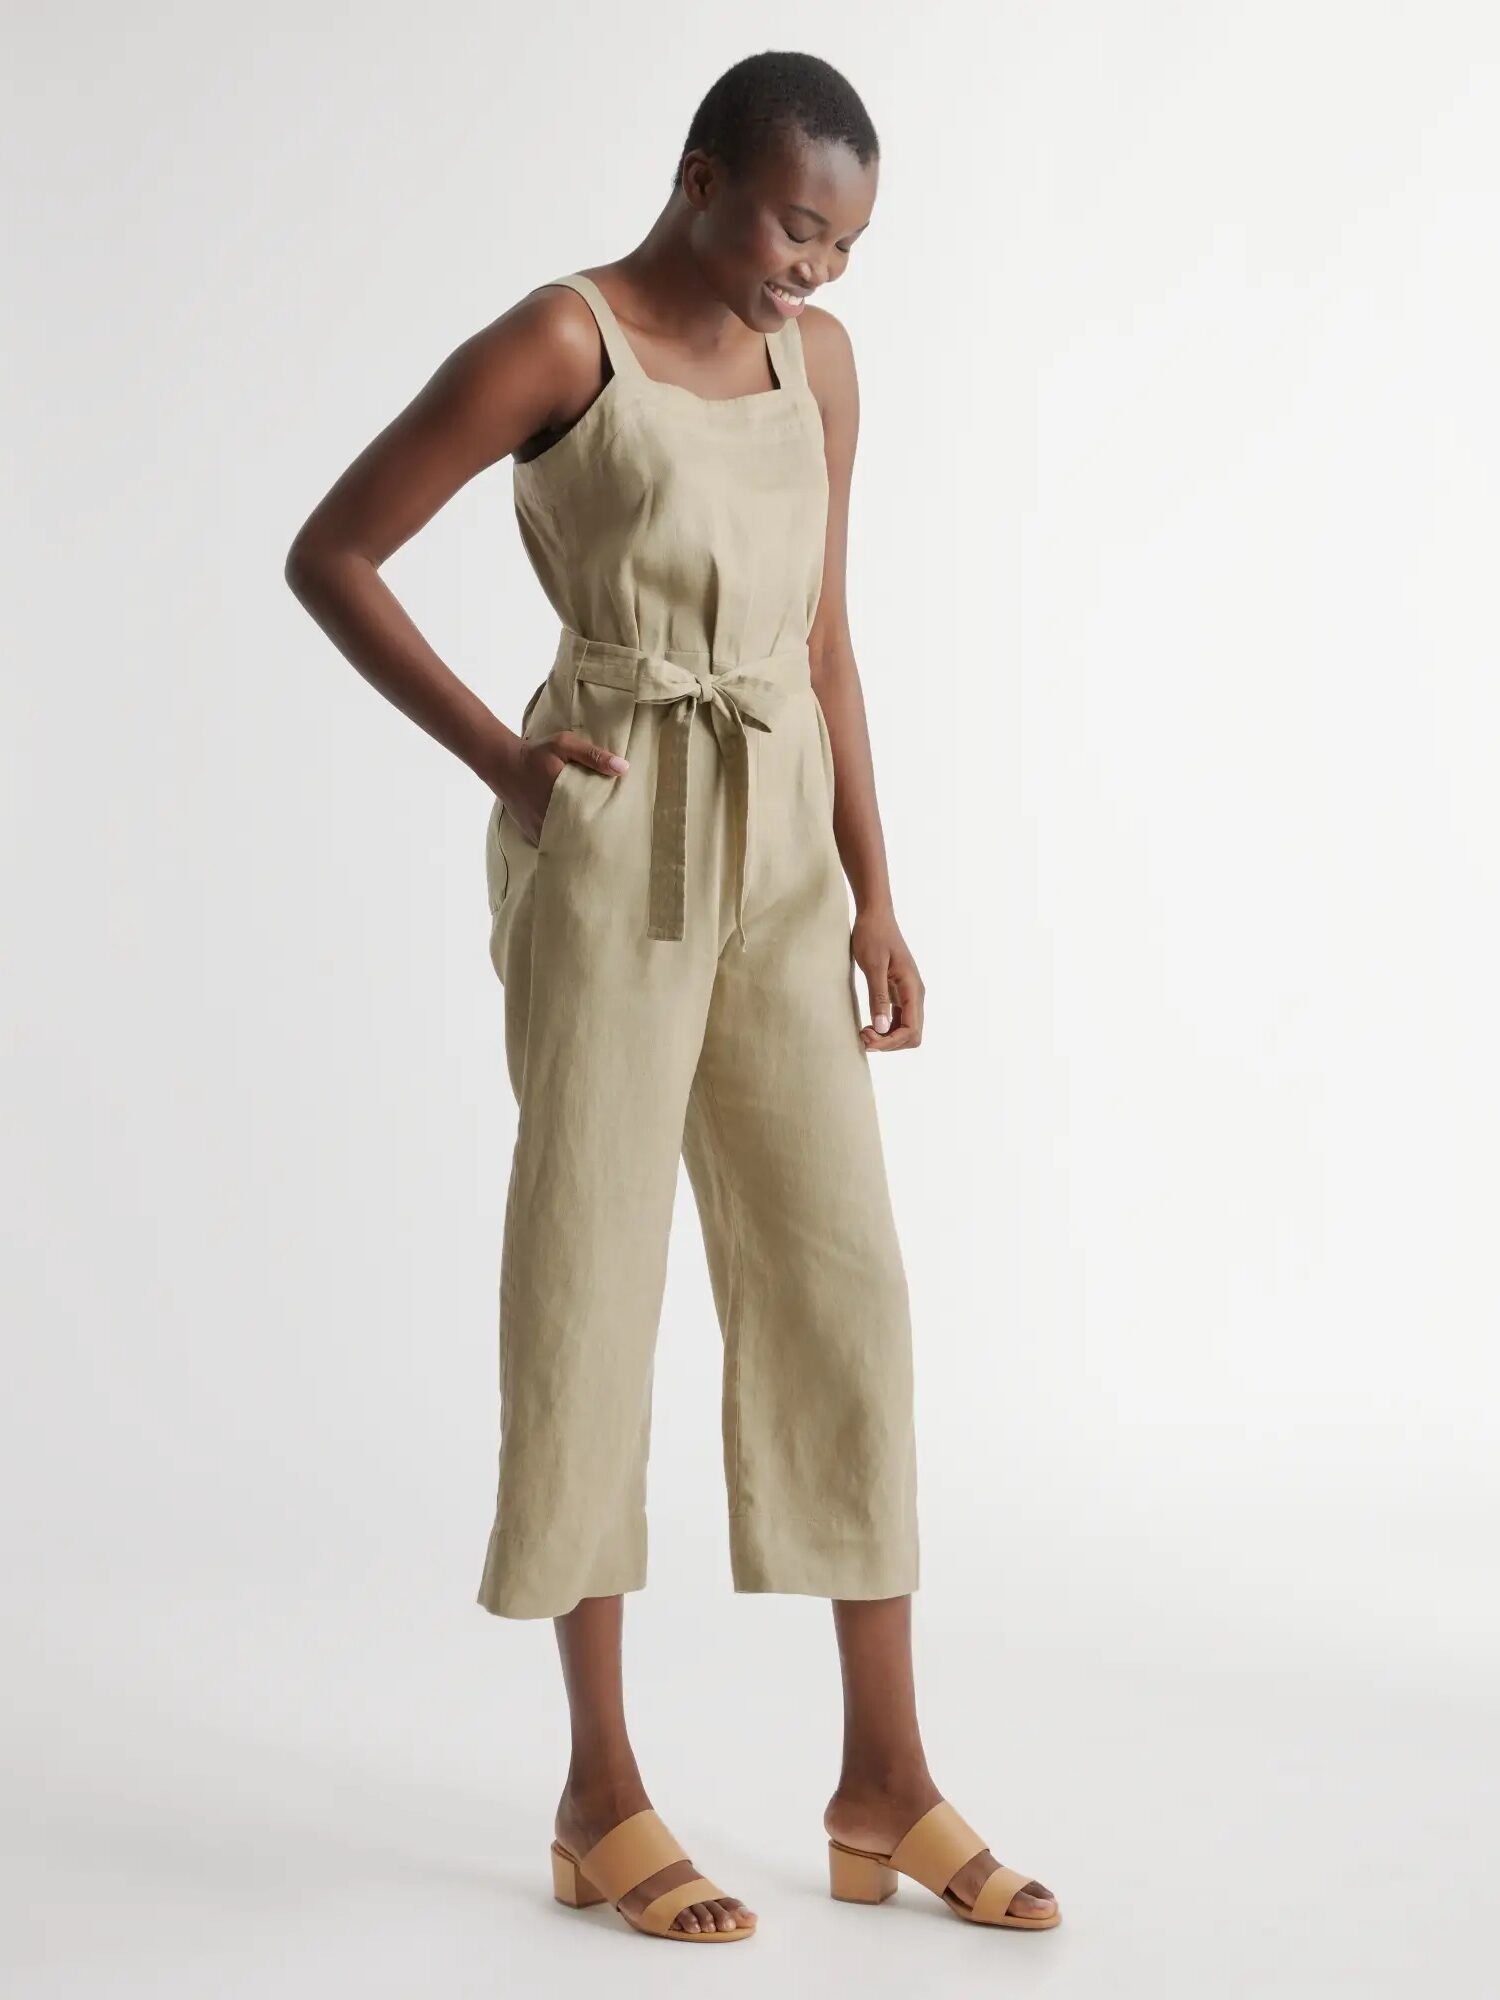 Sustainable Linen Clothing Brands We Love